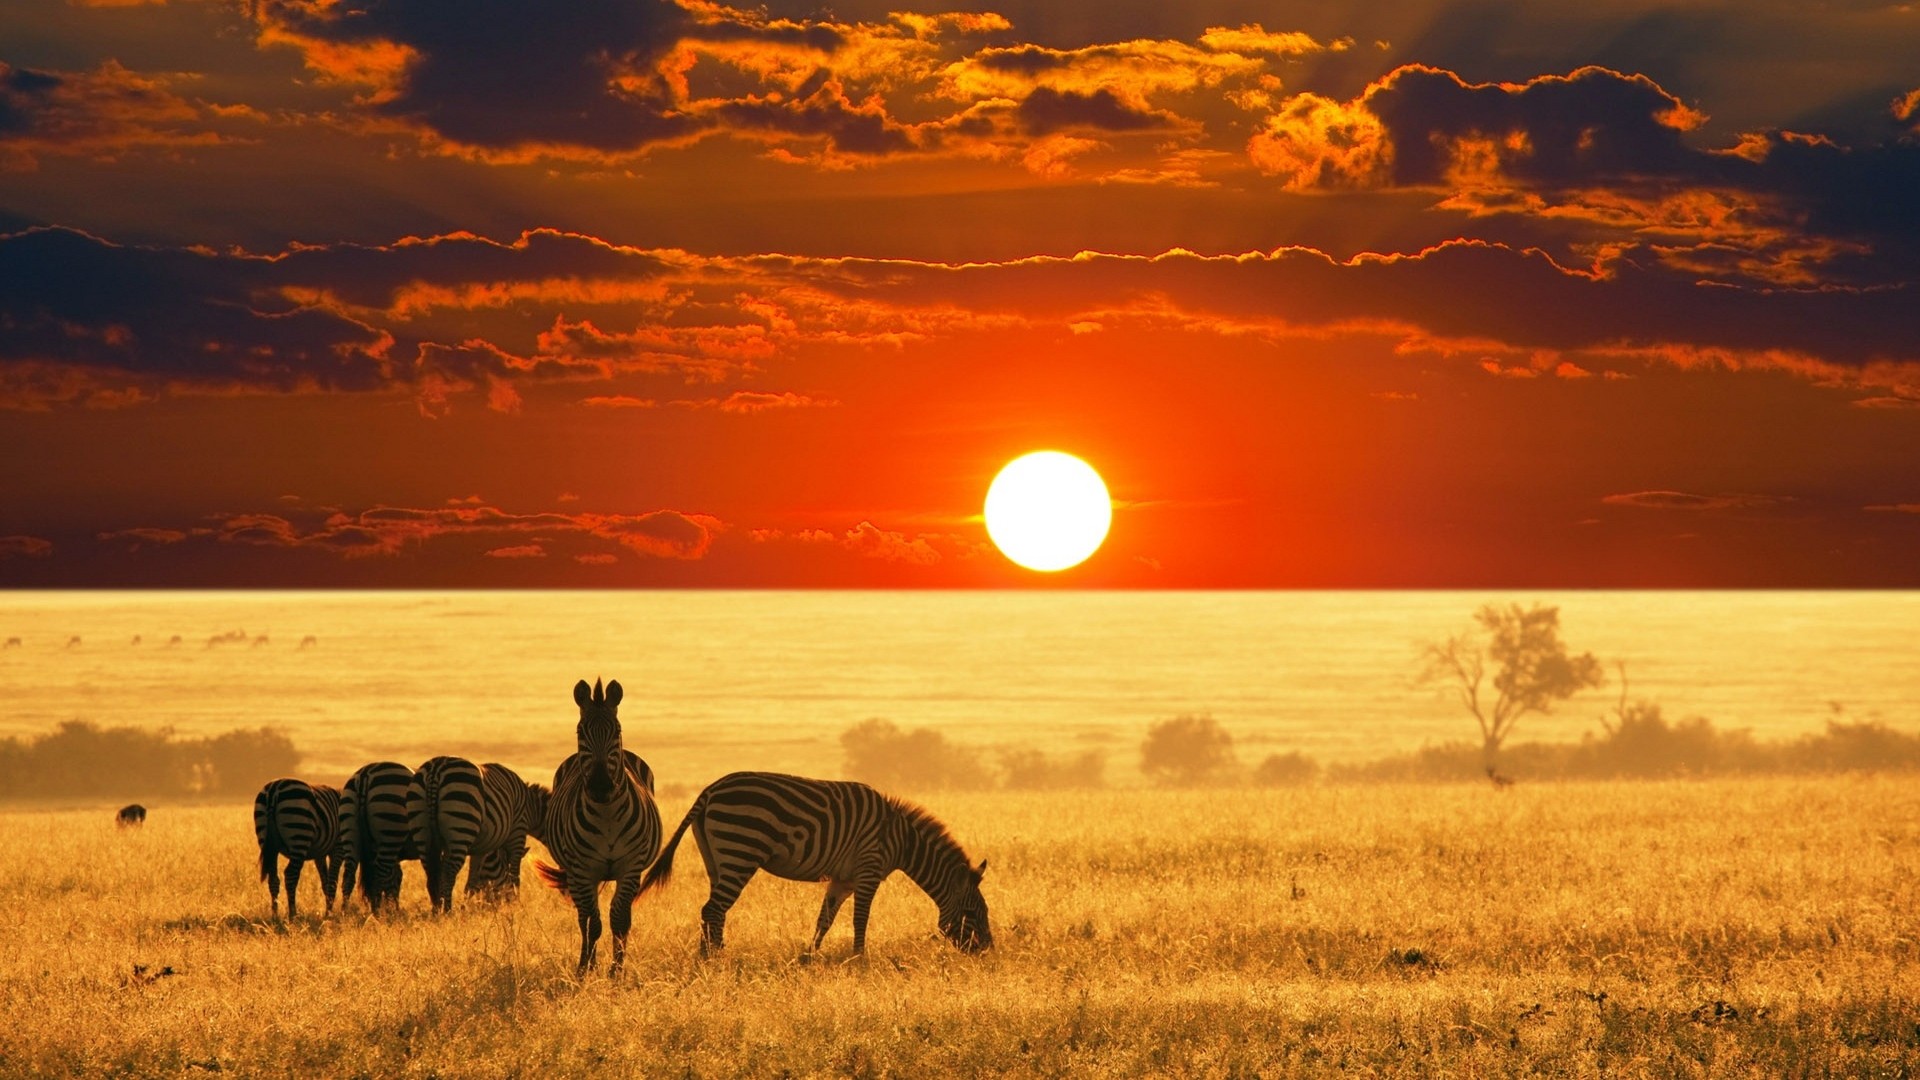 That being said, here are five different places that you should check out on your next safari adventure to Africa.